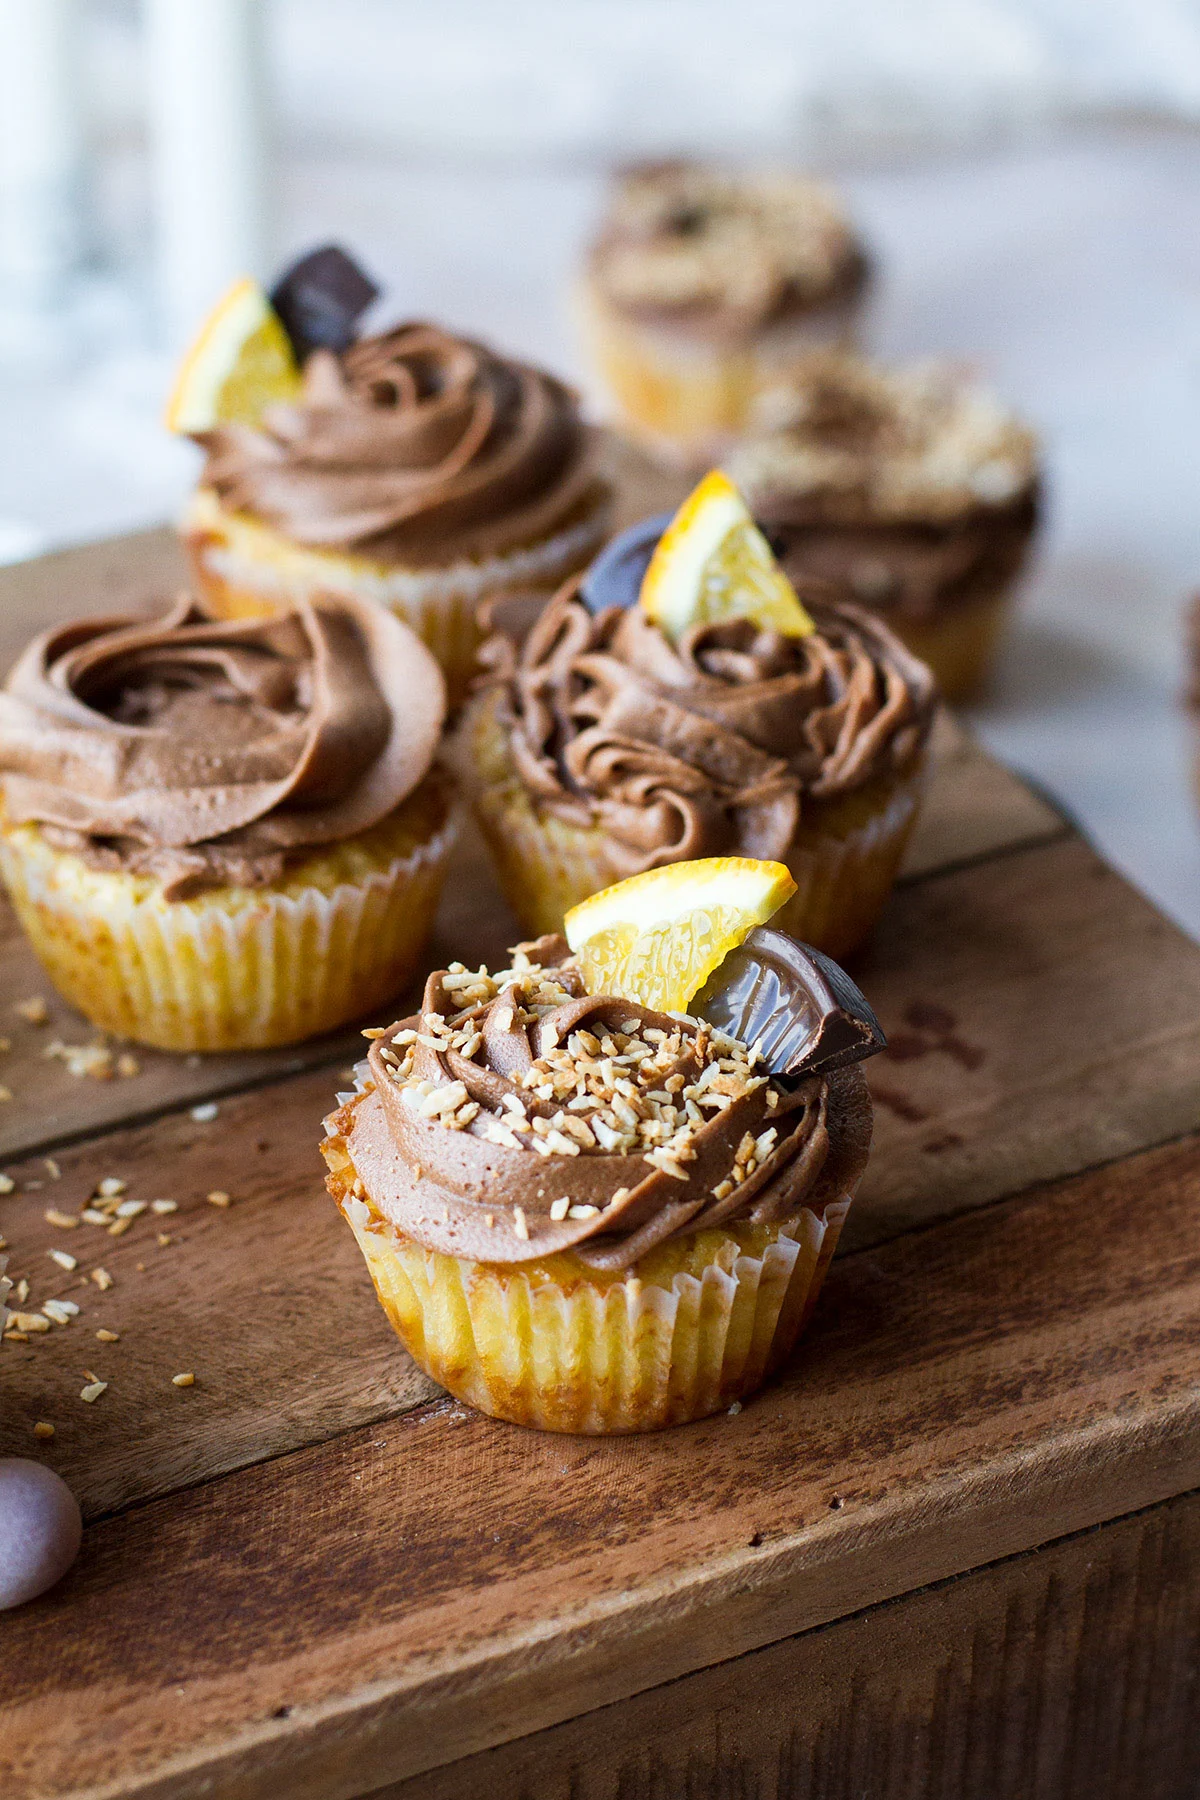 Coconut cupcakes with chocolate buttercream and orange wedge garnishes.